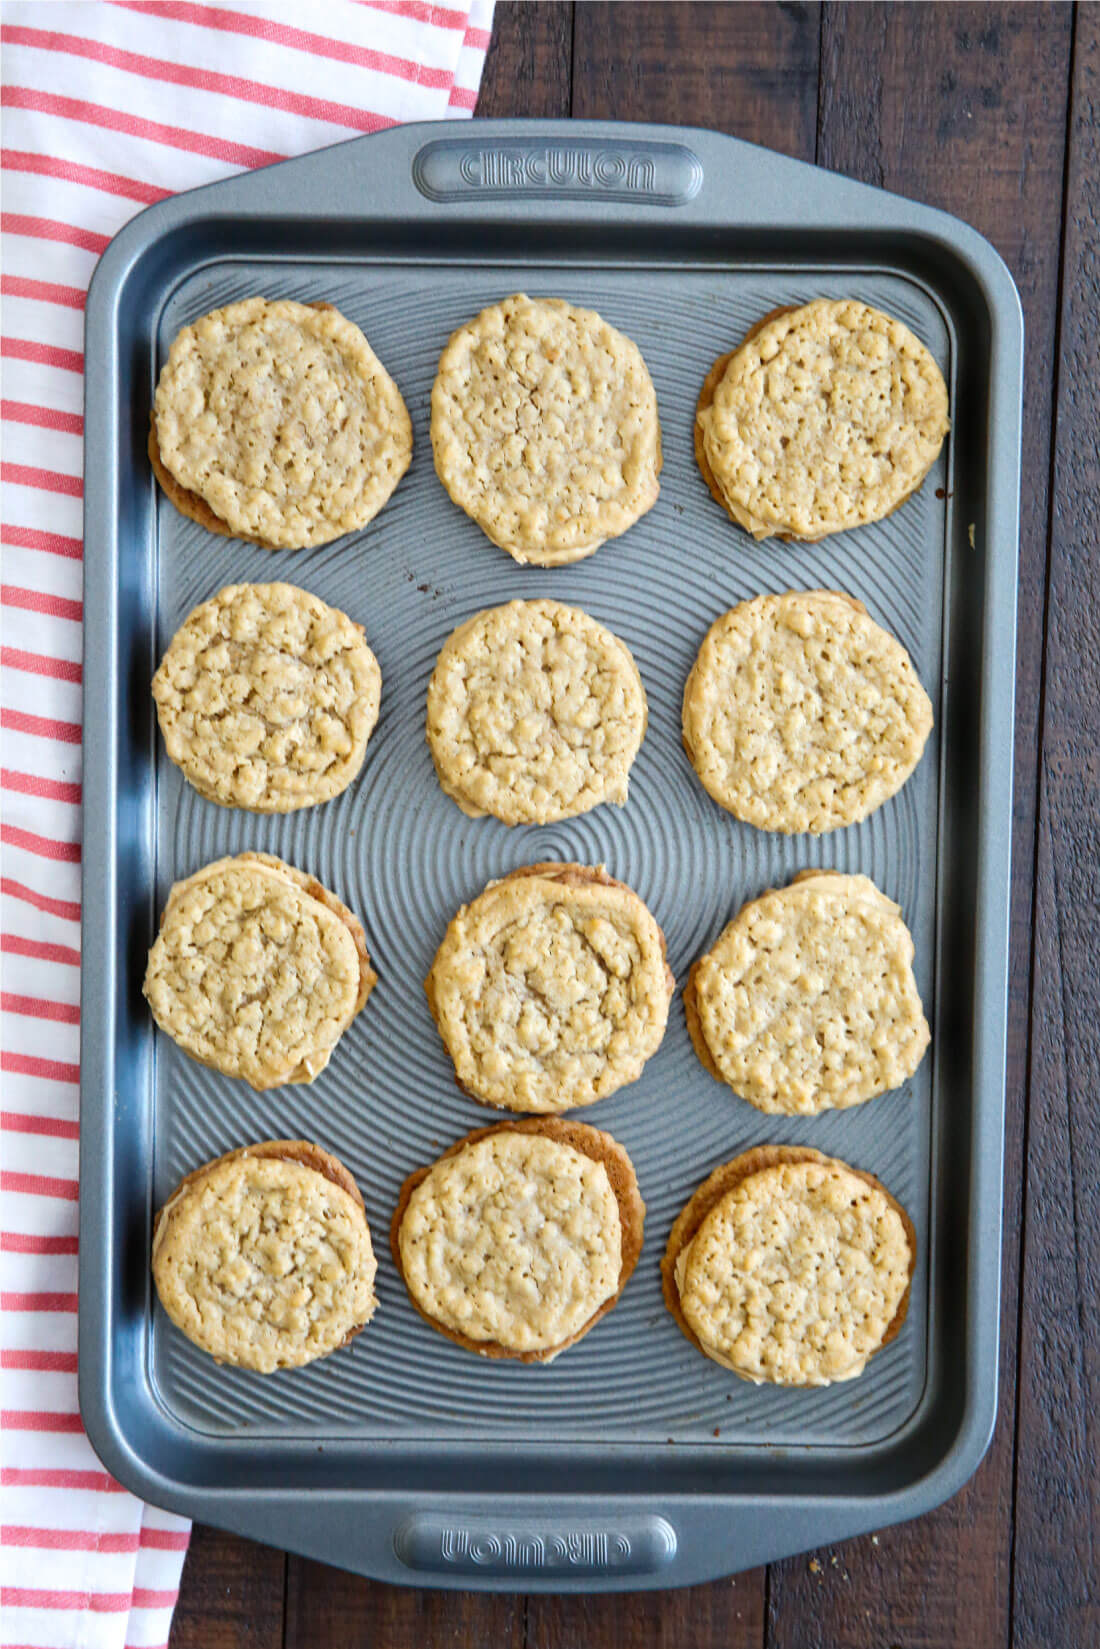 Homemade Nutter Butter Cookies- these cookies are like whoopie pies with all things peanut butter. They melt in your mouth! The whole batch via www.thirtyhandmadedays.com